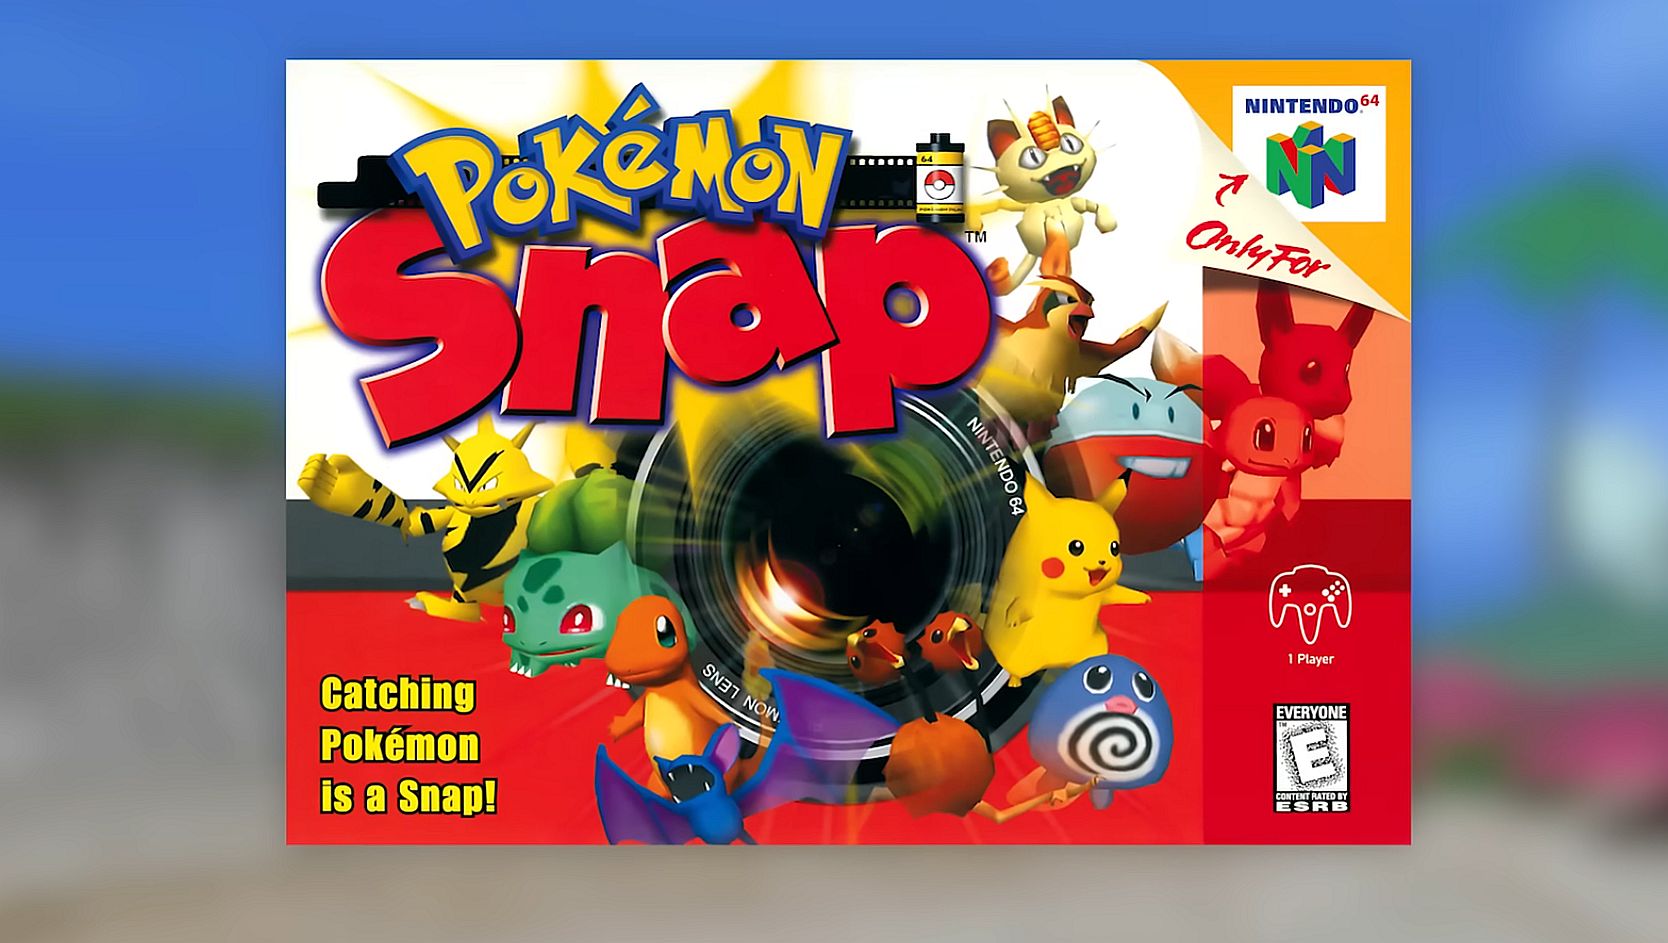 Image for N64 classic Pokemon Snap is coming to Nintendo Switch Online + Expansion Pack